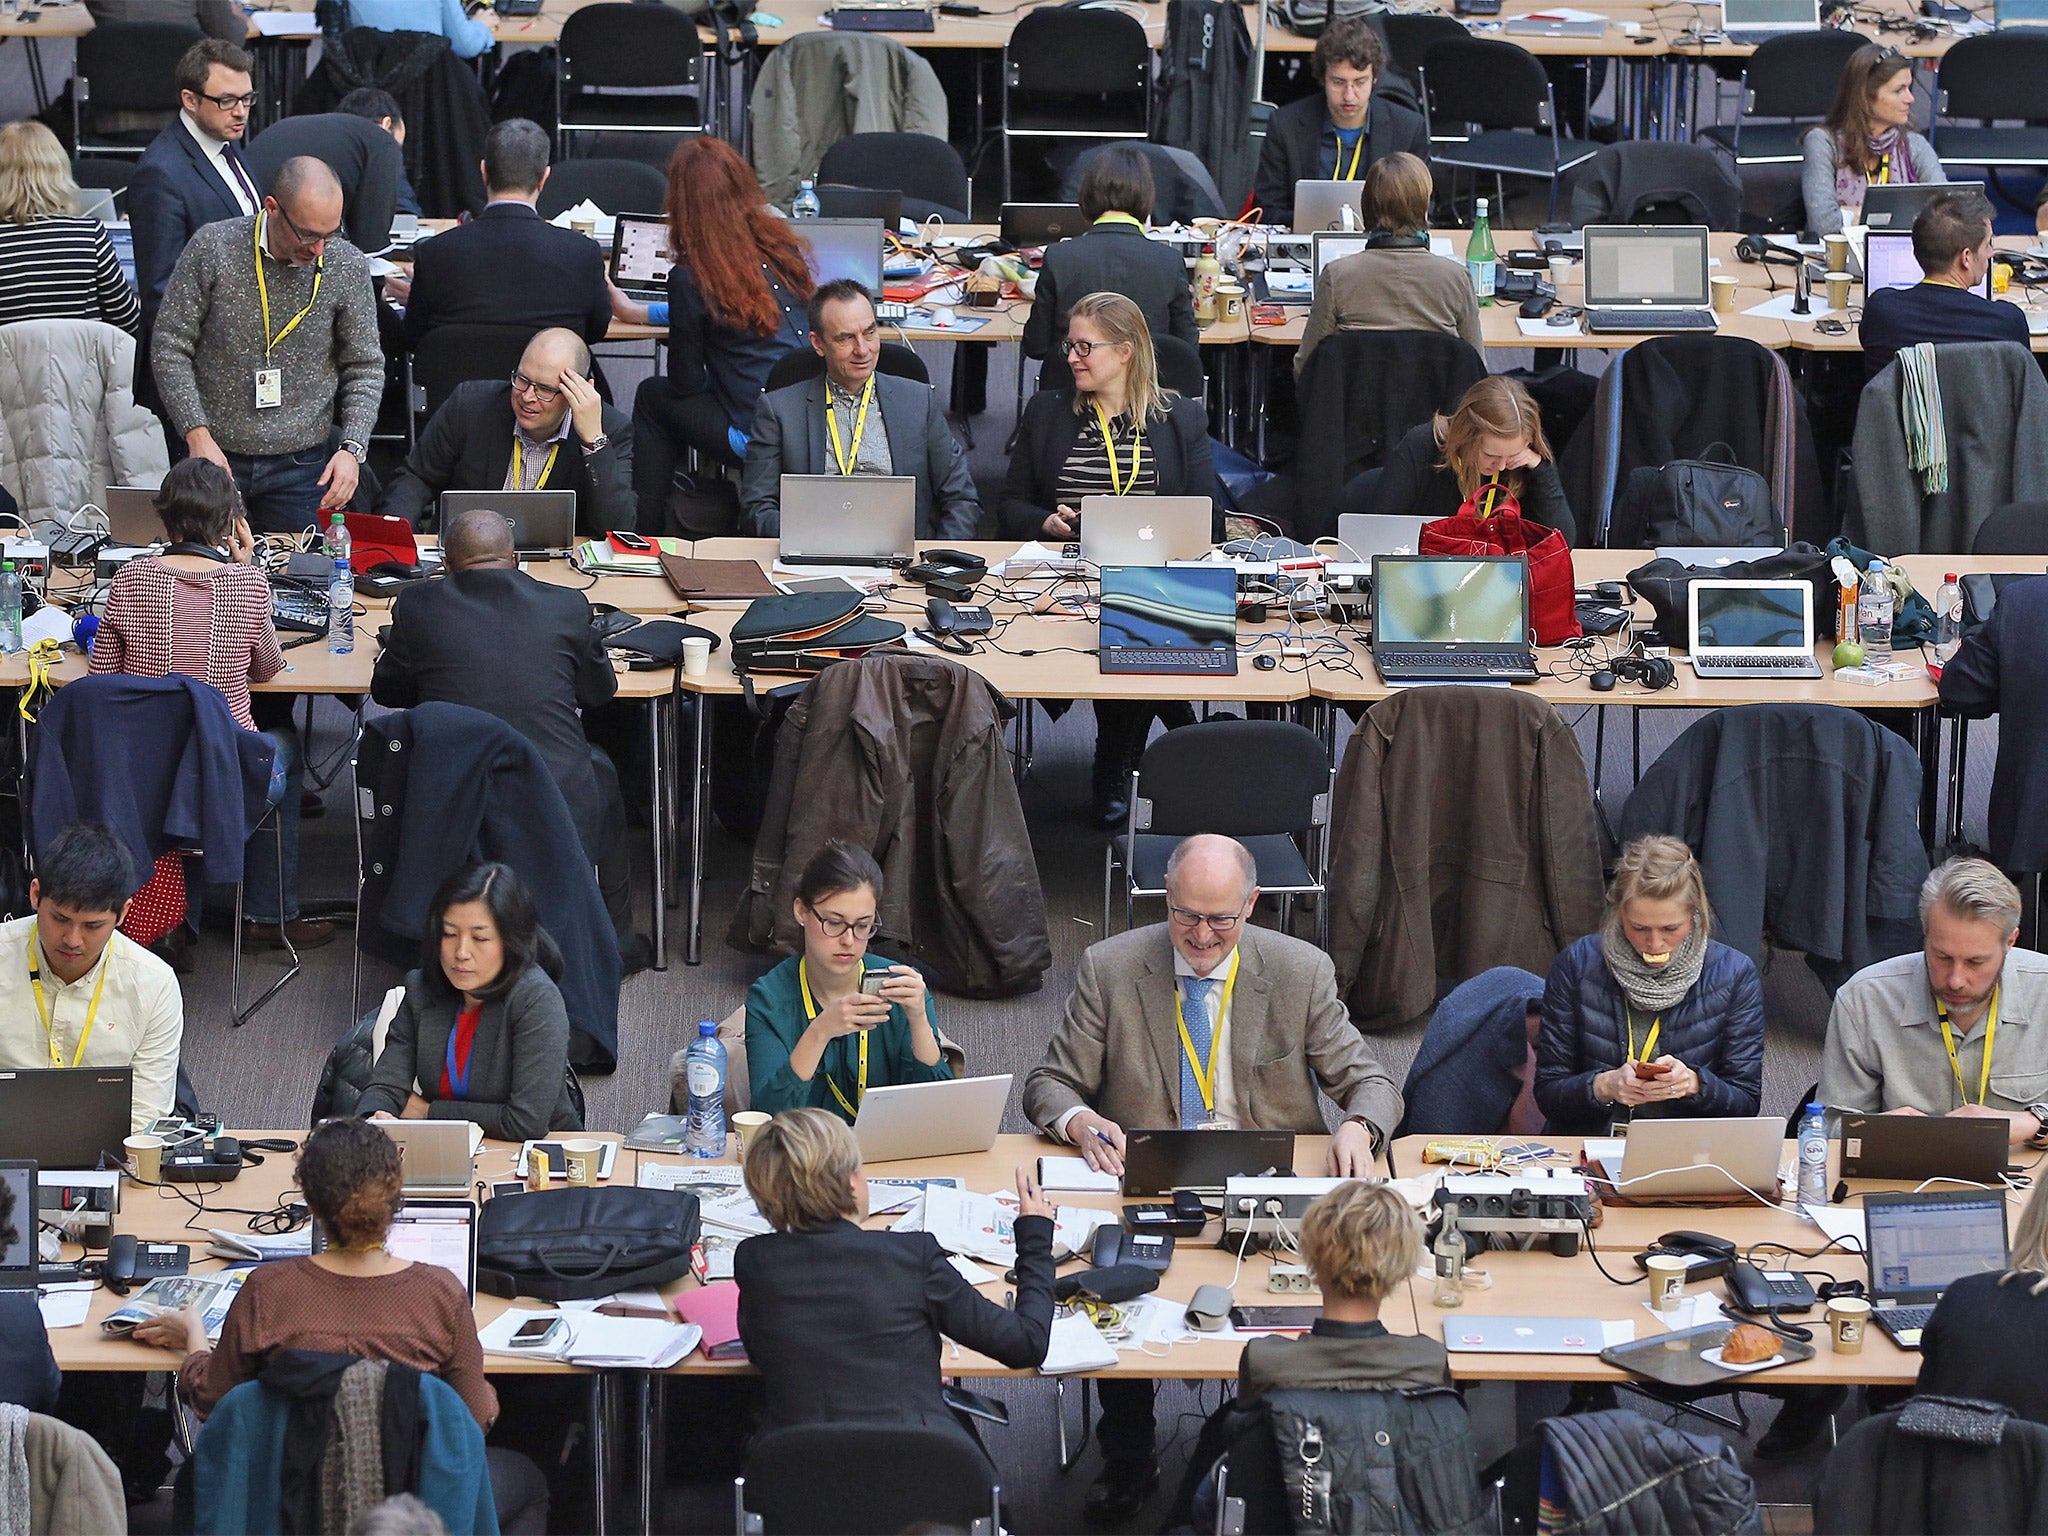 Journalists follow the negotiations as the EU summit entered its second day